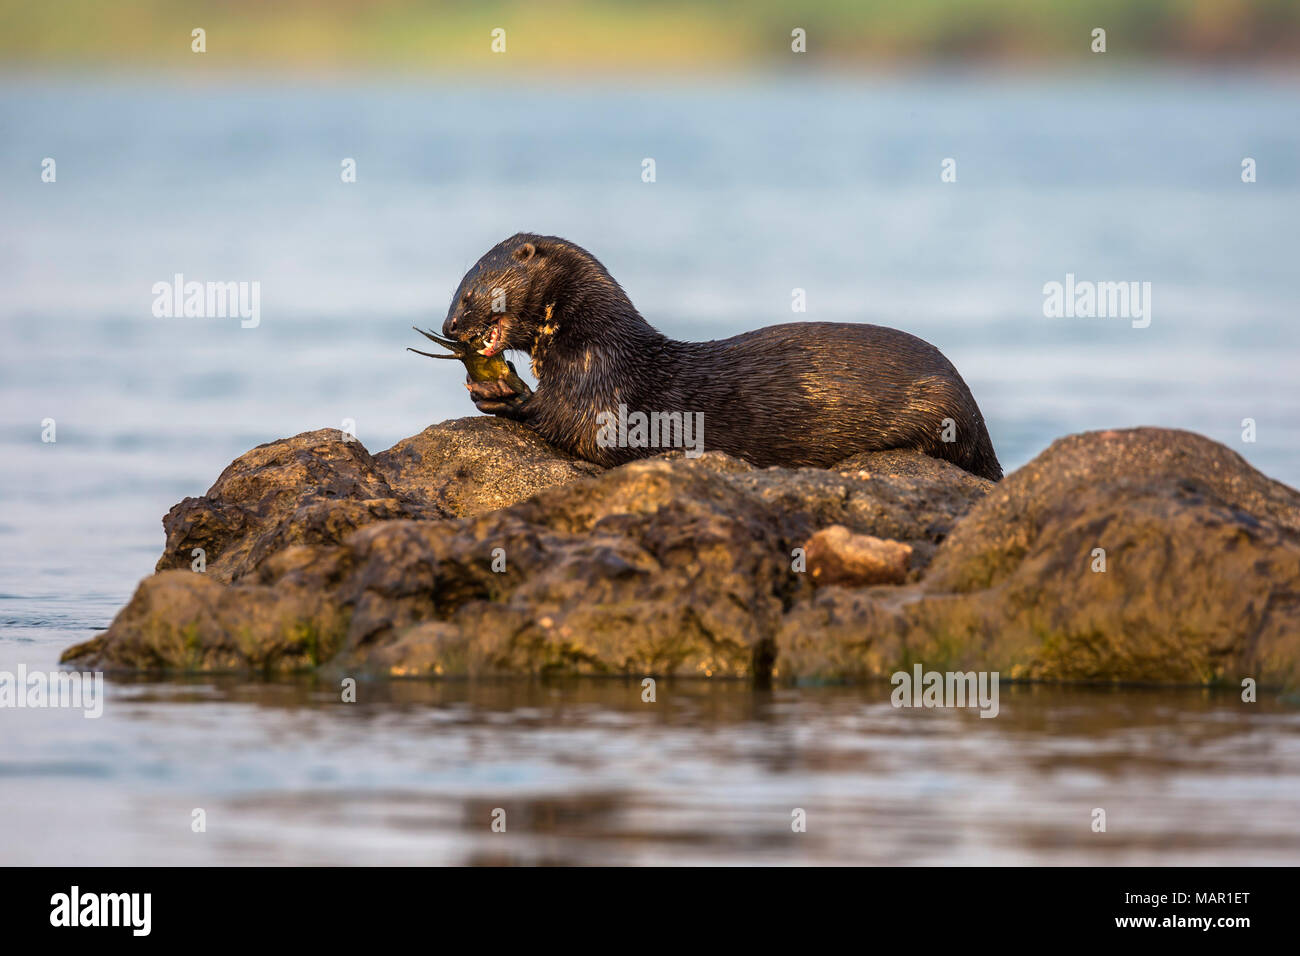 Spotted necked otter (Hydrictis maculicollis) eating leopard squeaker fish, Chobe River, Botswana, Africa Stock Photo